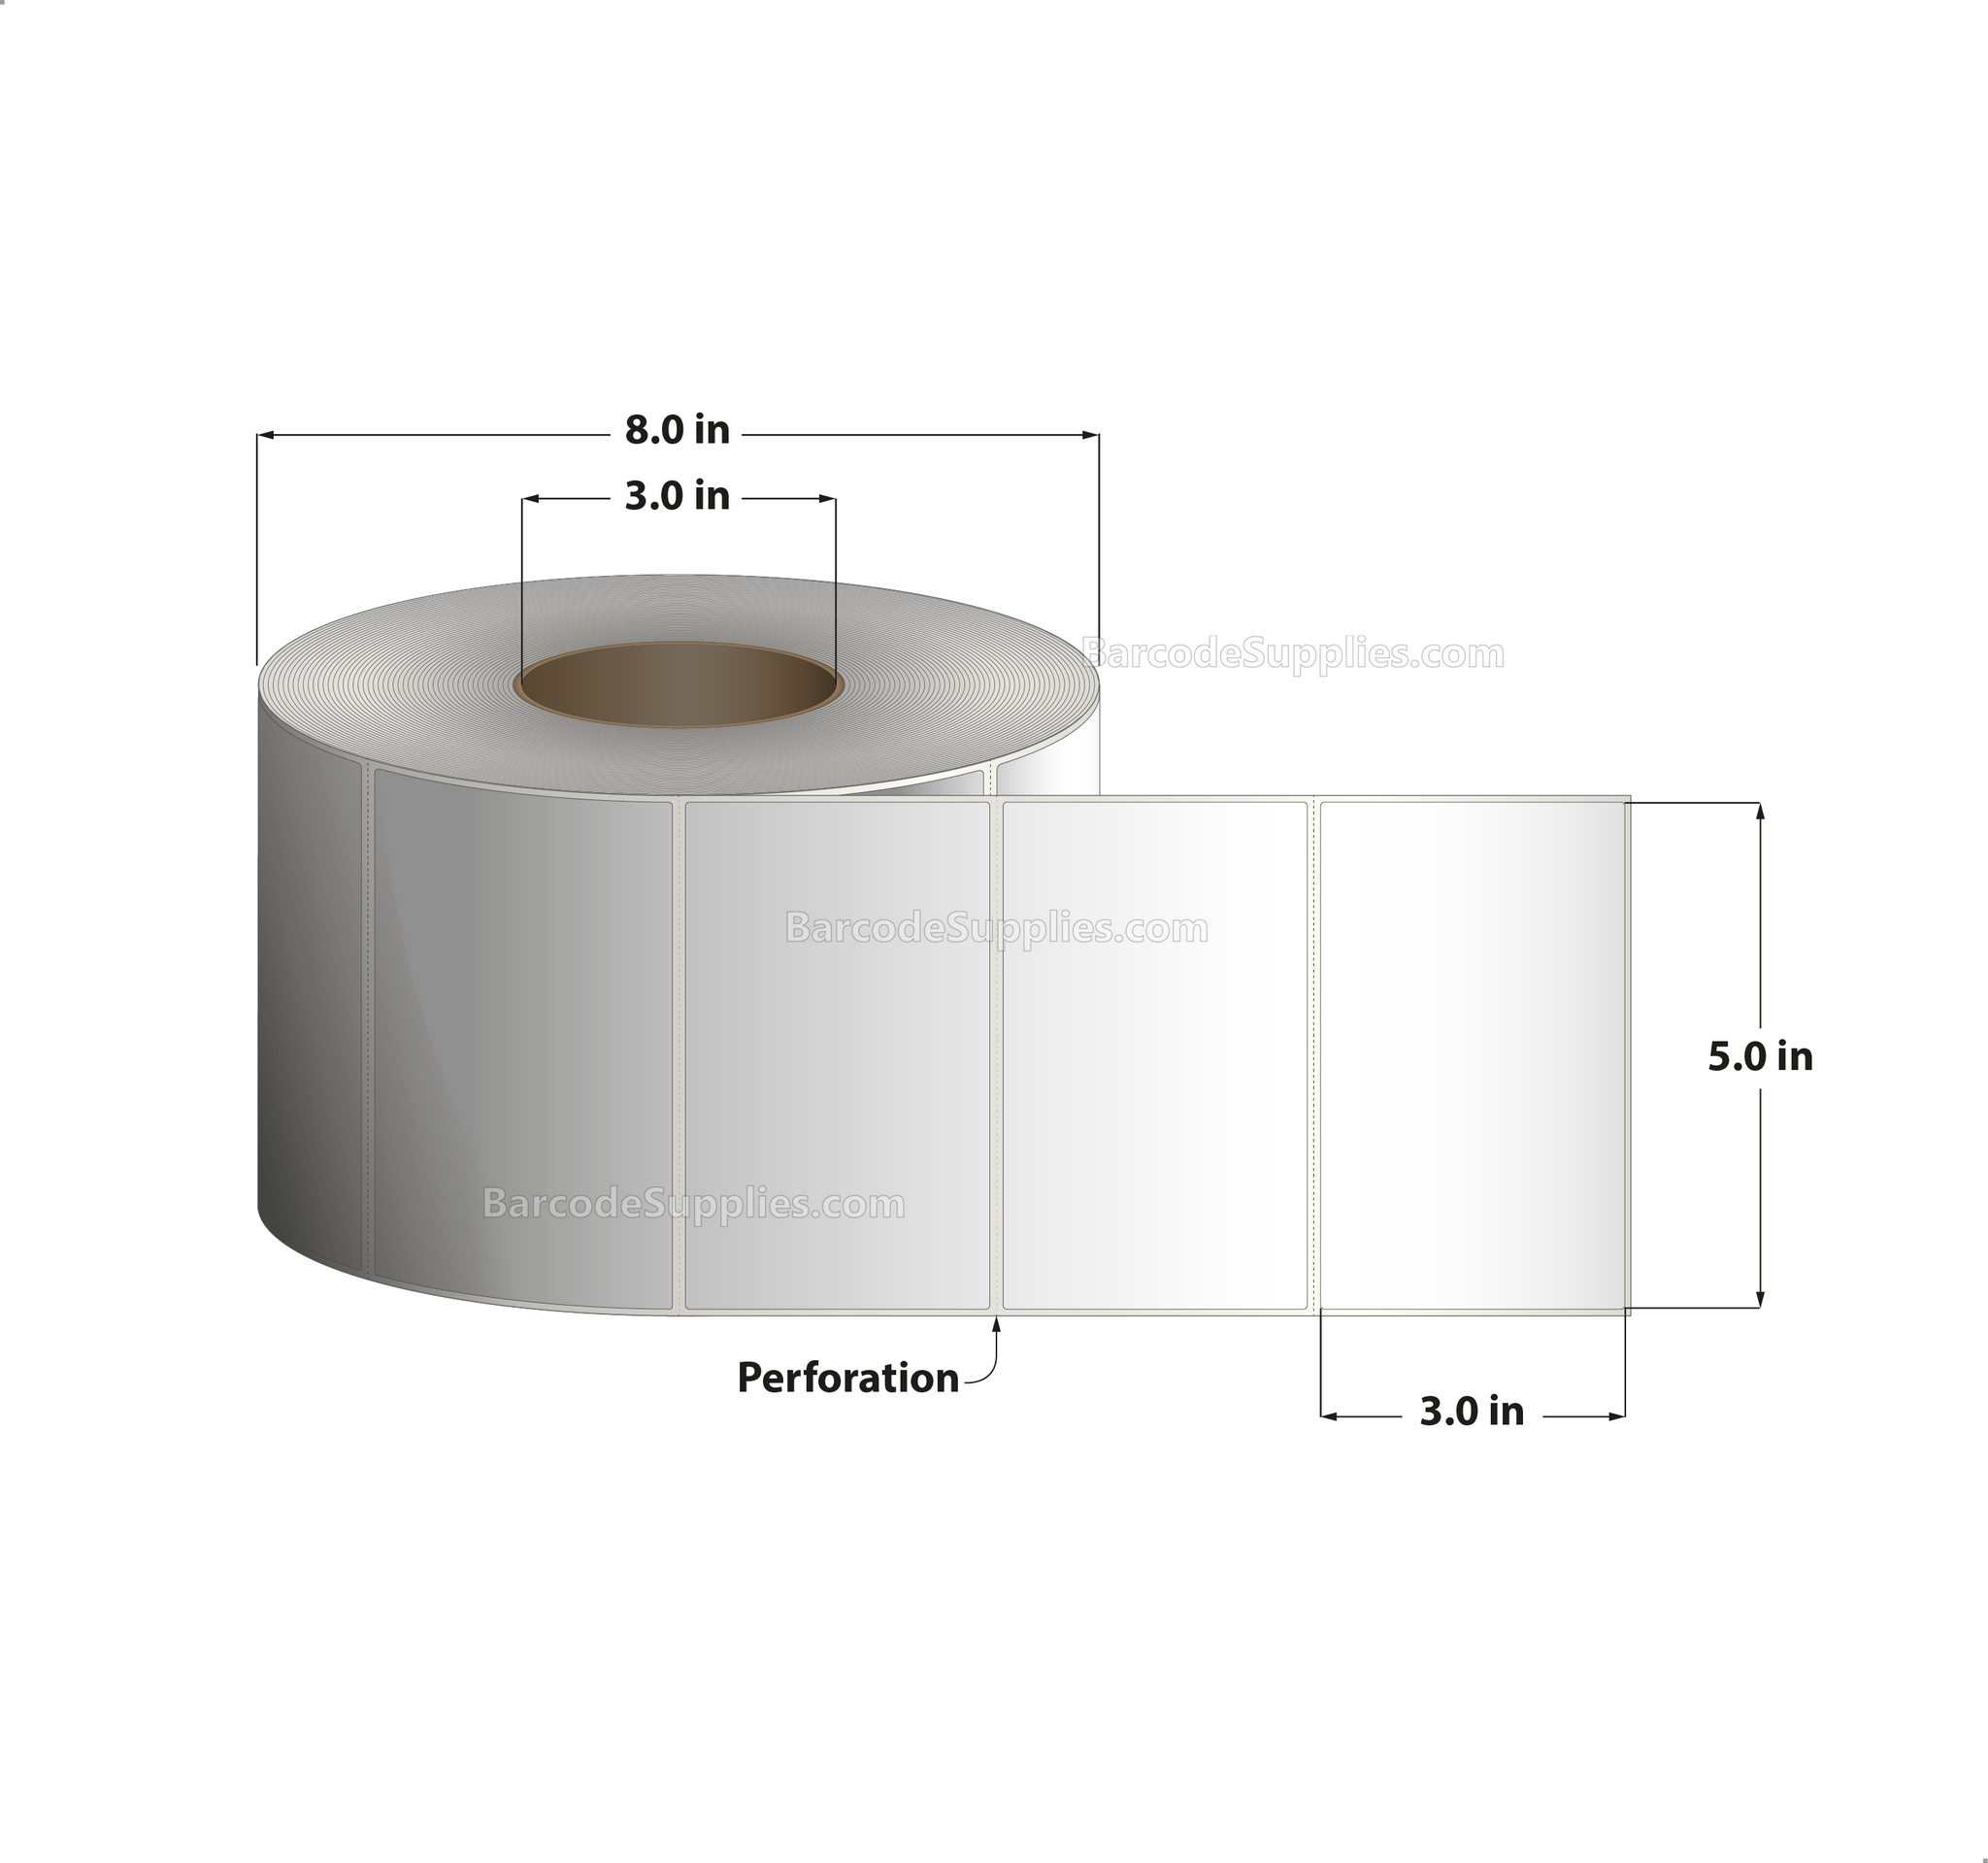 5 x 3 Thermal Transfer White Labels With Permanent Adhesive - Perforated - 1900 Labels Per Roll - Carton Of 4 Rolls - 7600 Labels Total - MPN: RT-5-3-1900-3